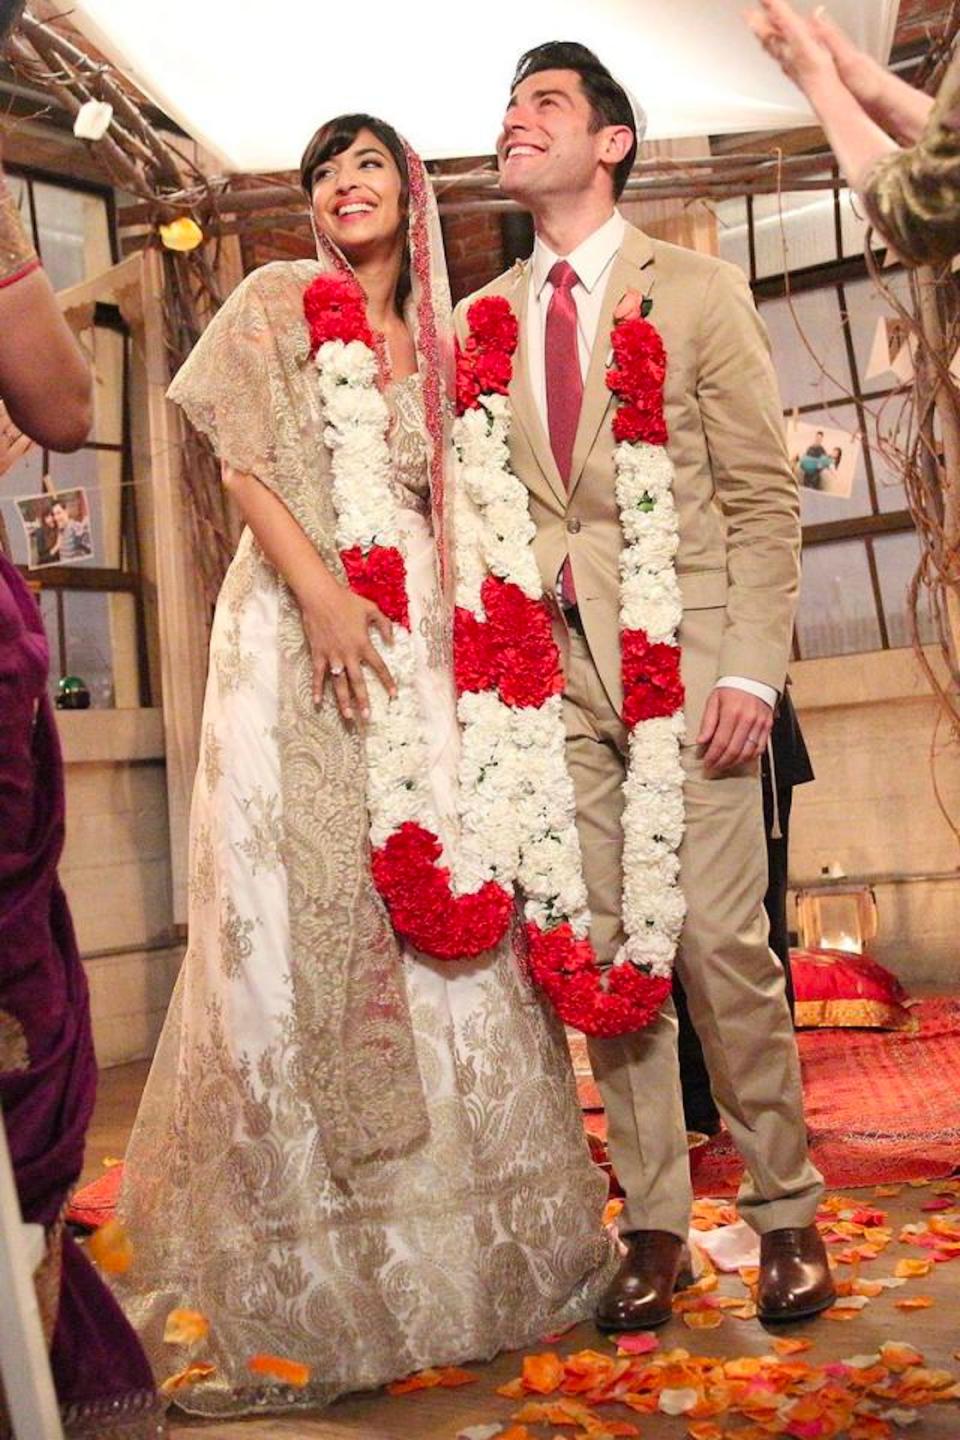 Cece and Schmidt during their wedding on "New Girl."